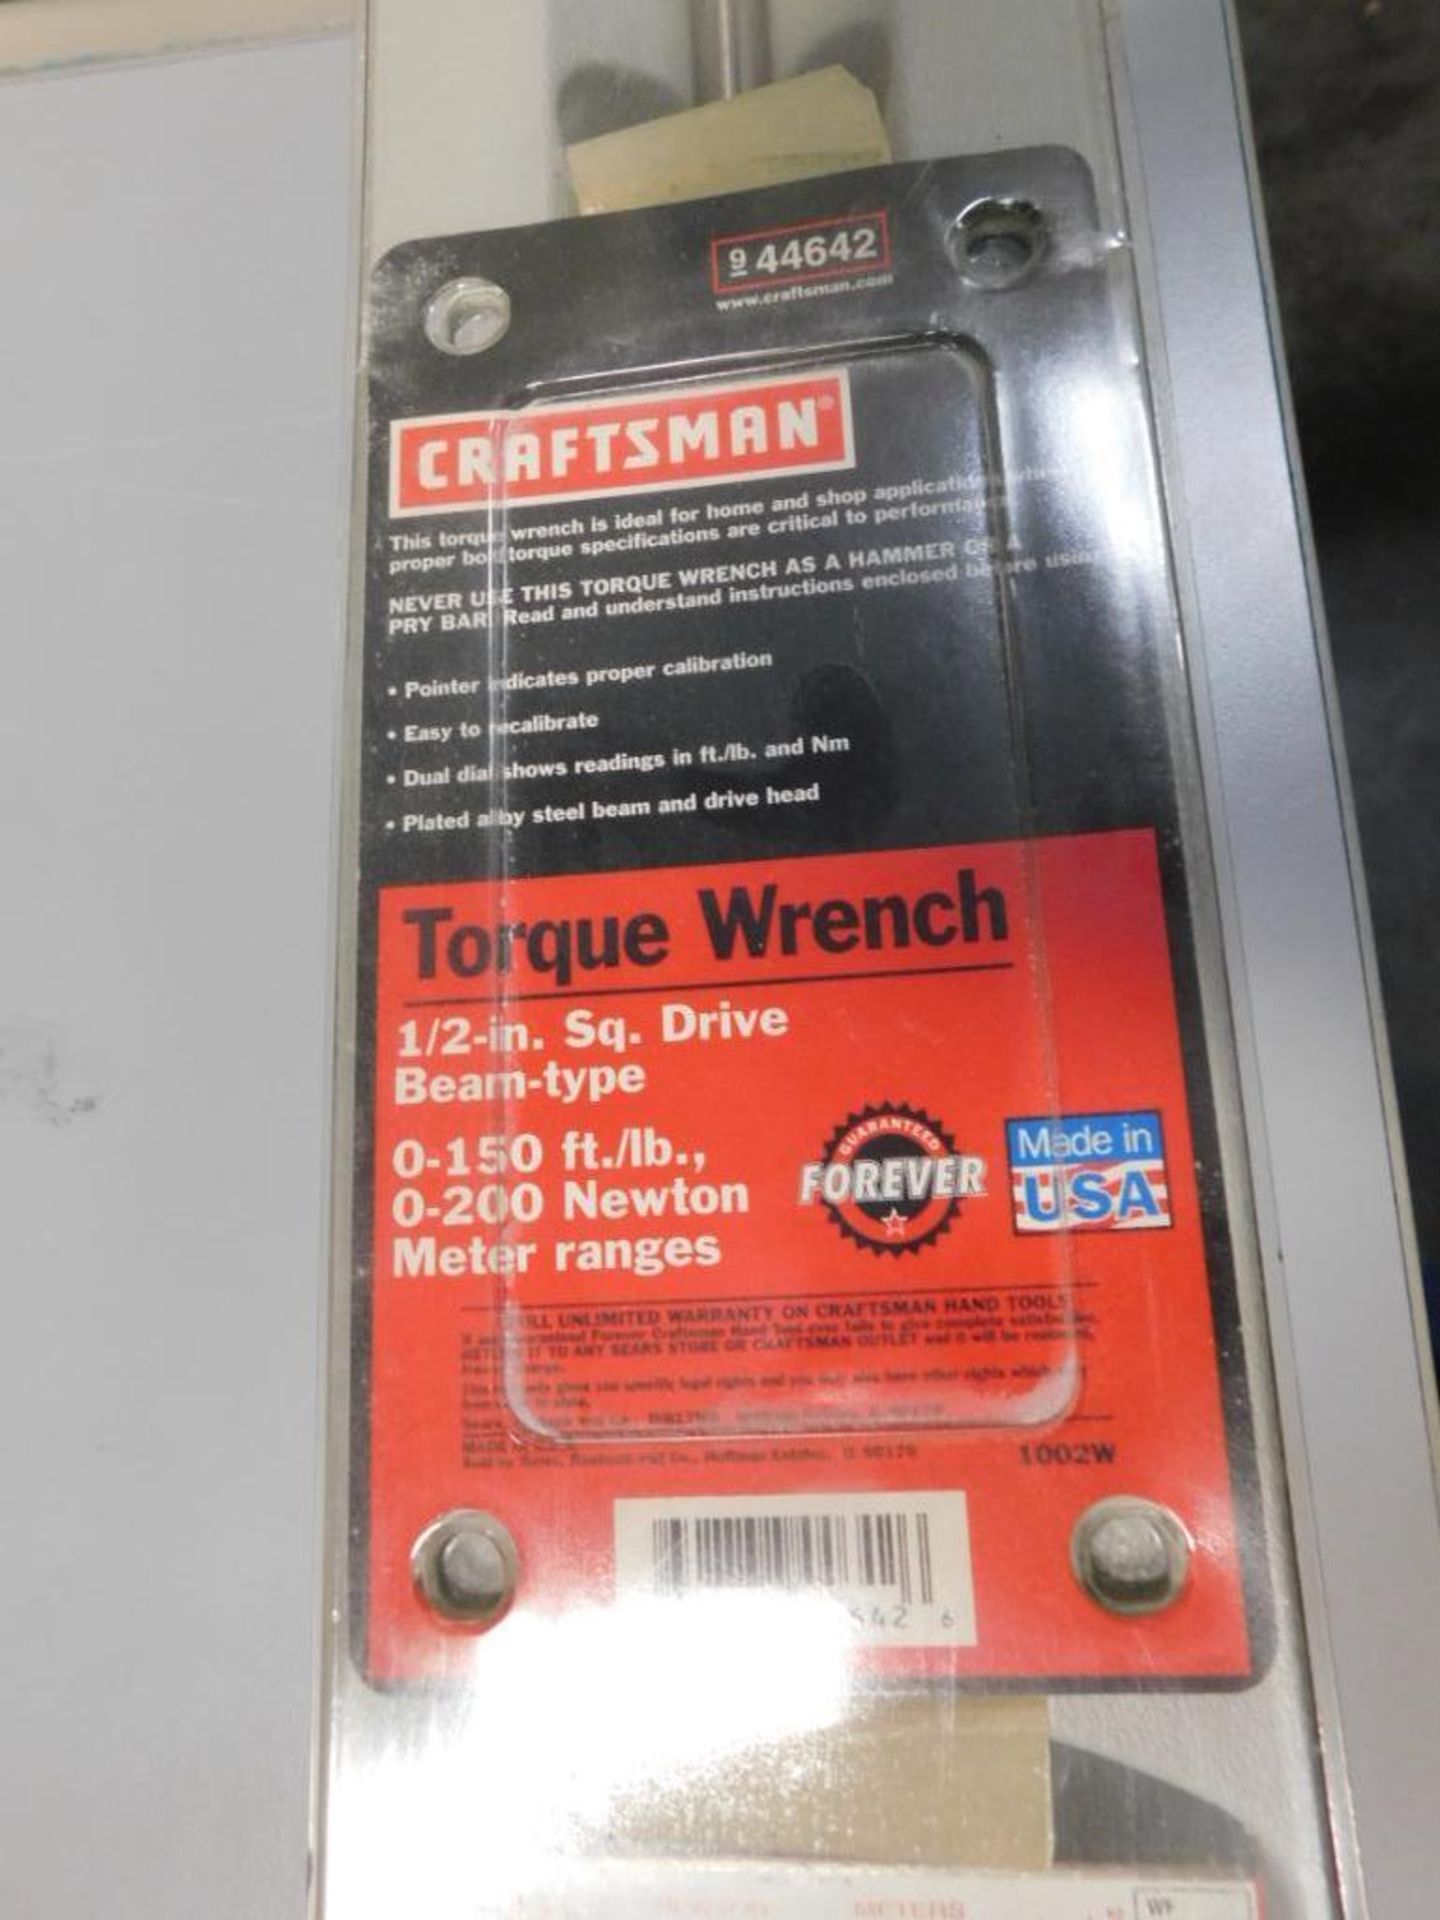 Craftsman 1/2 sq. in. Torque Wrench (LOCATED IN MINNEAPOLIS, MN.) - Image 2 of 2